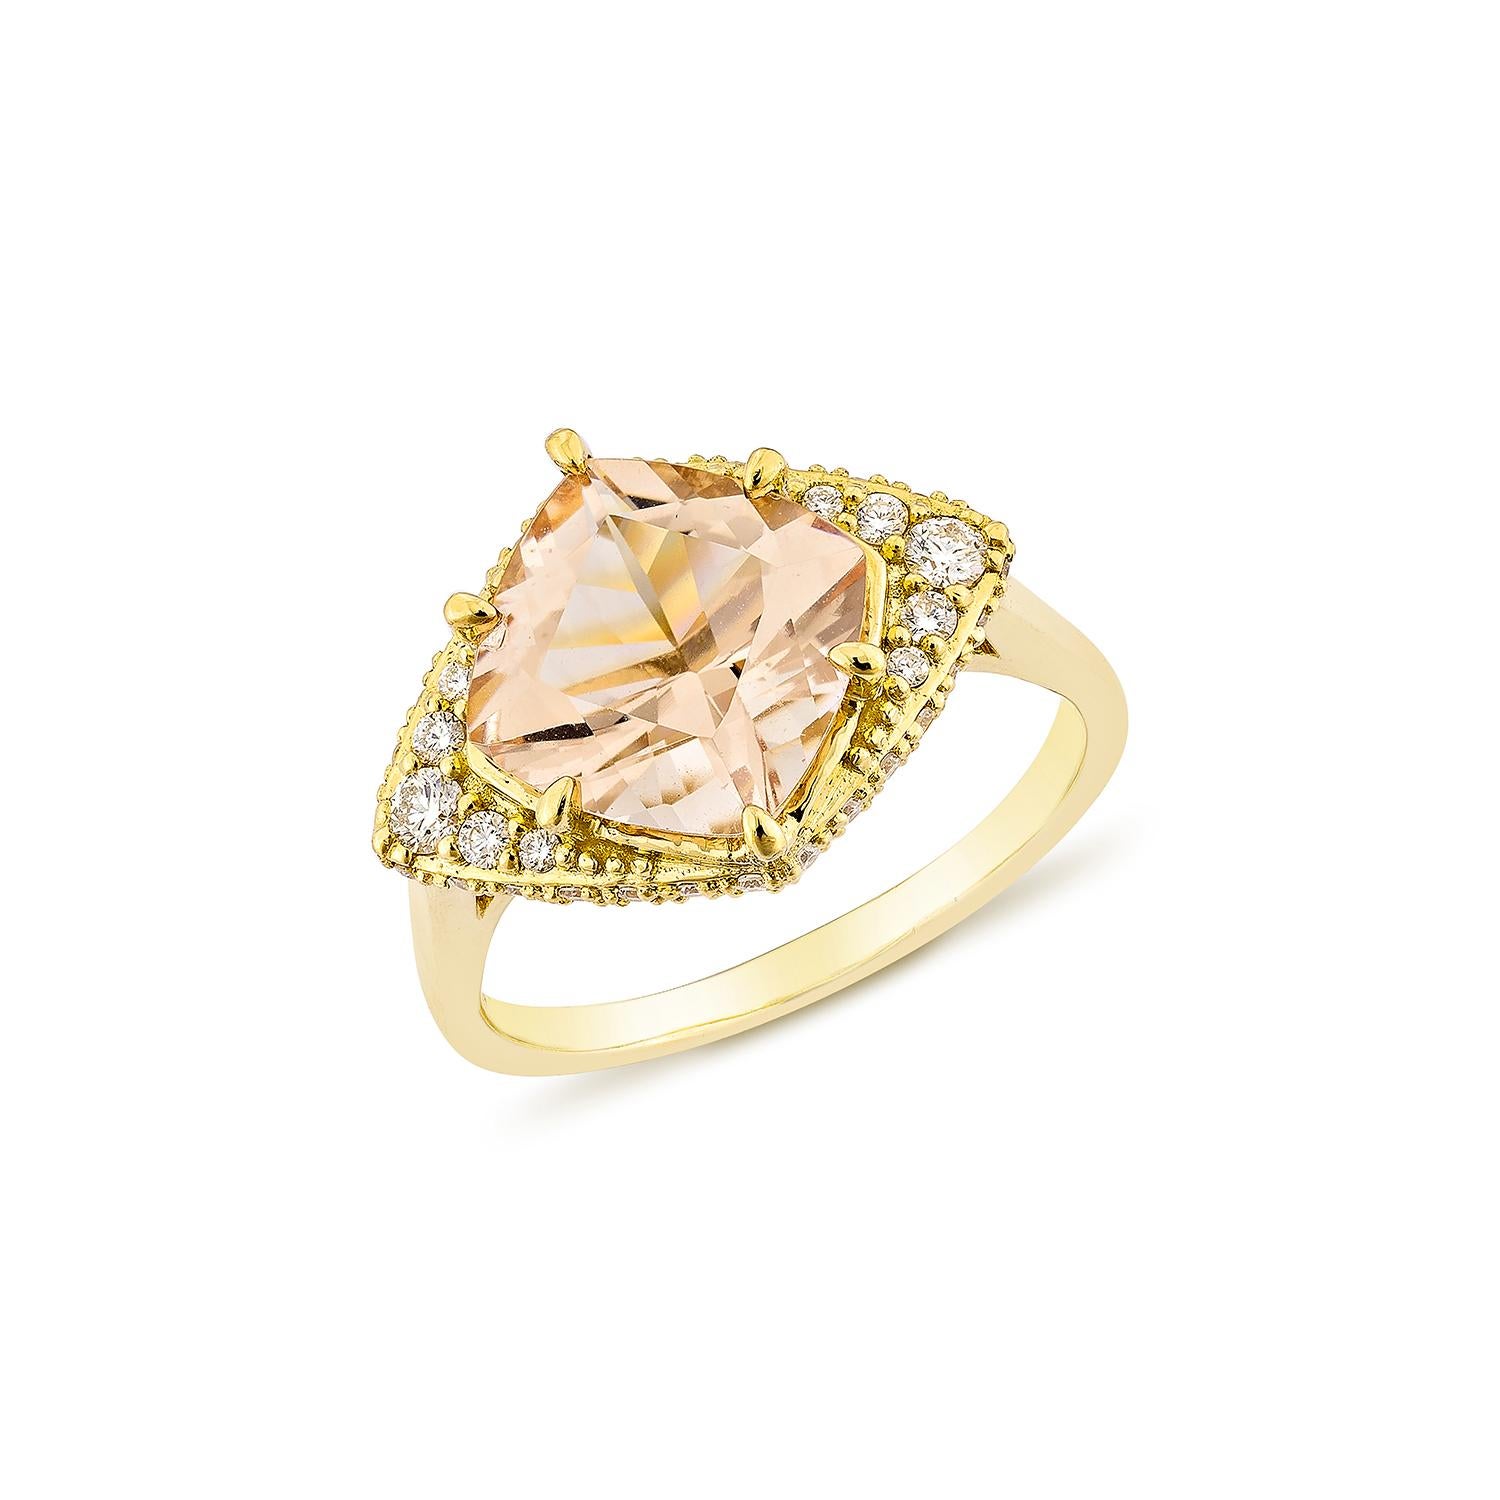 Contemporary 2.00 Carat Morganite Fancy Ring in 18Karat Yellow Gold with White Diamond.    For Sale